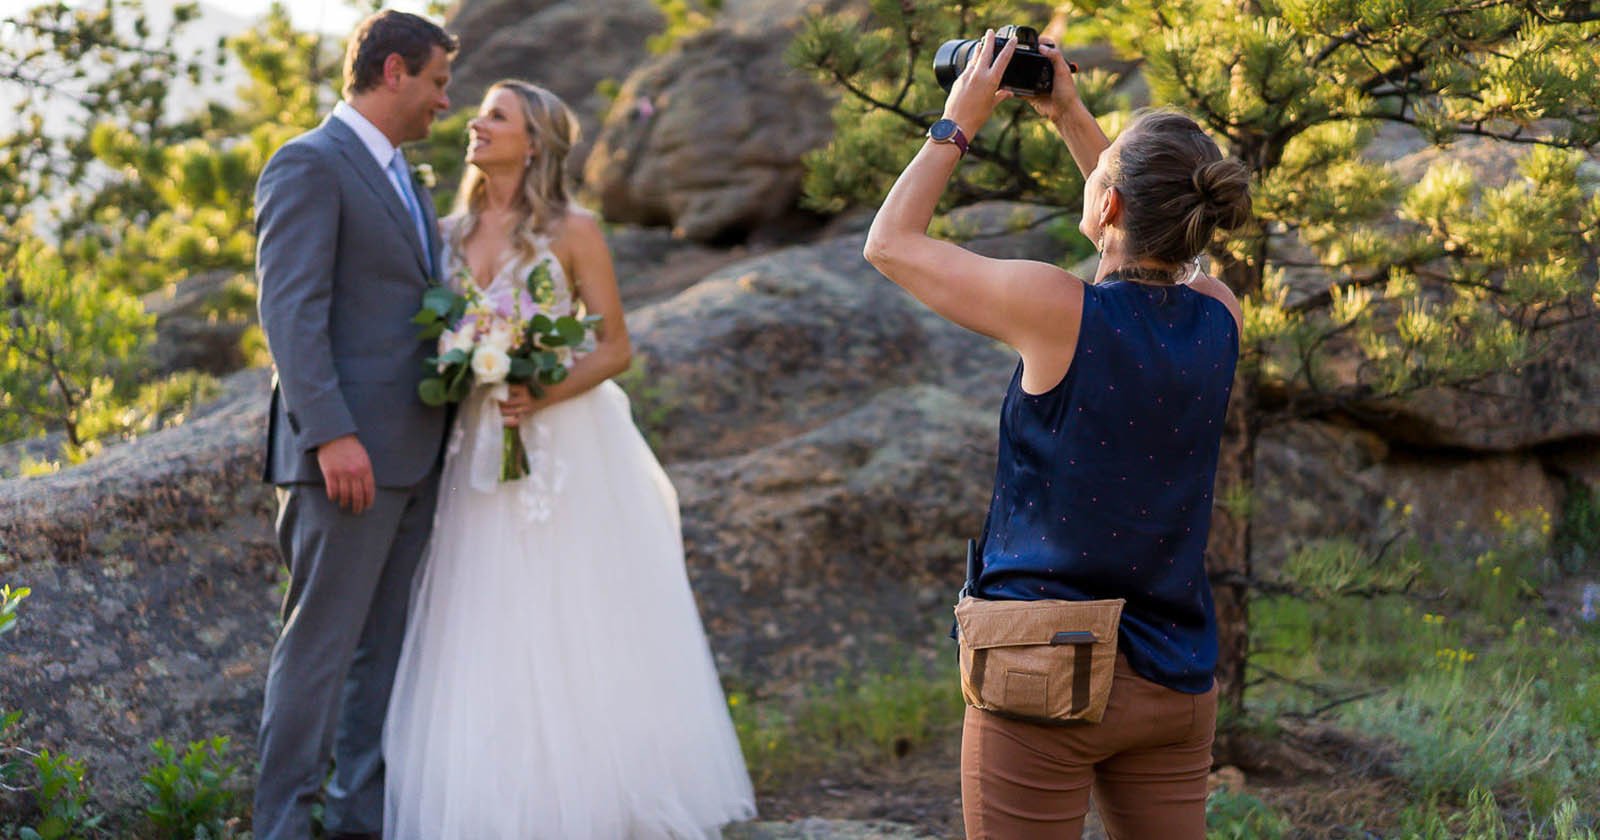 What to Wear When Photographing a Wedding